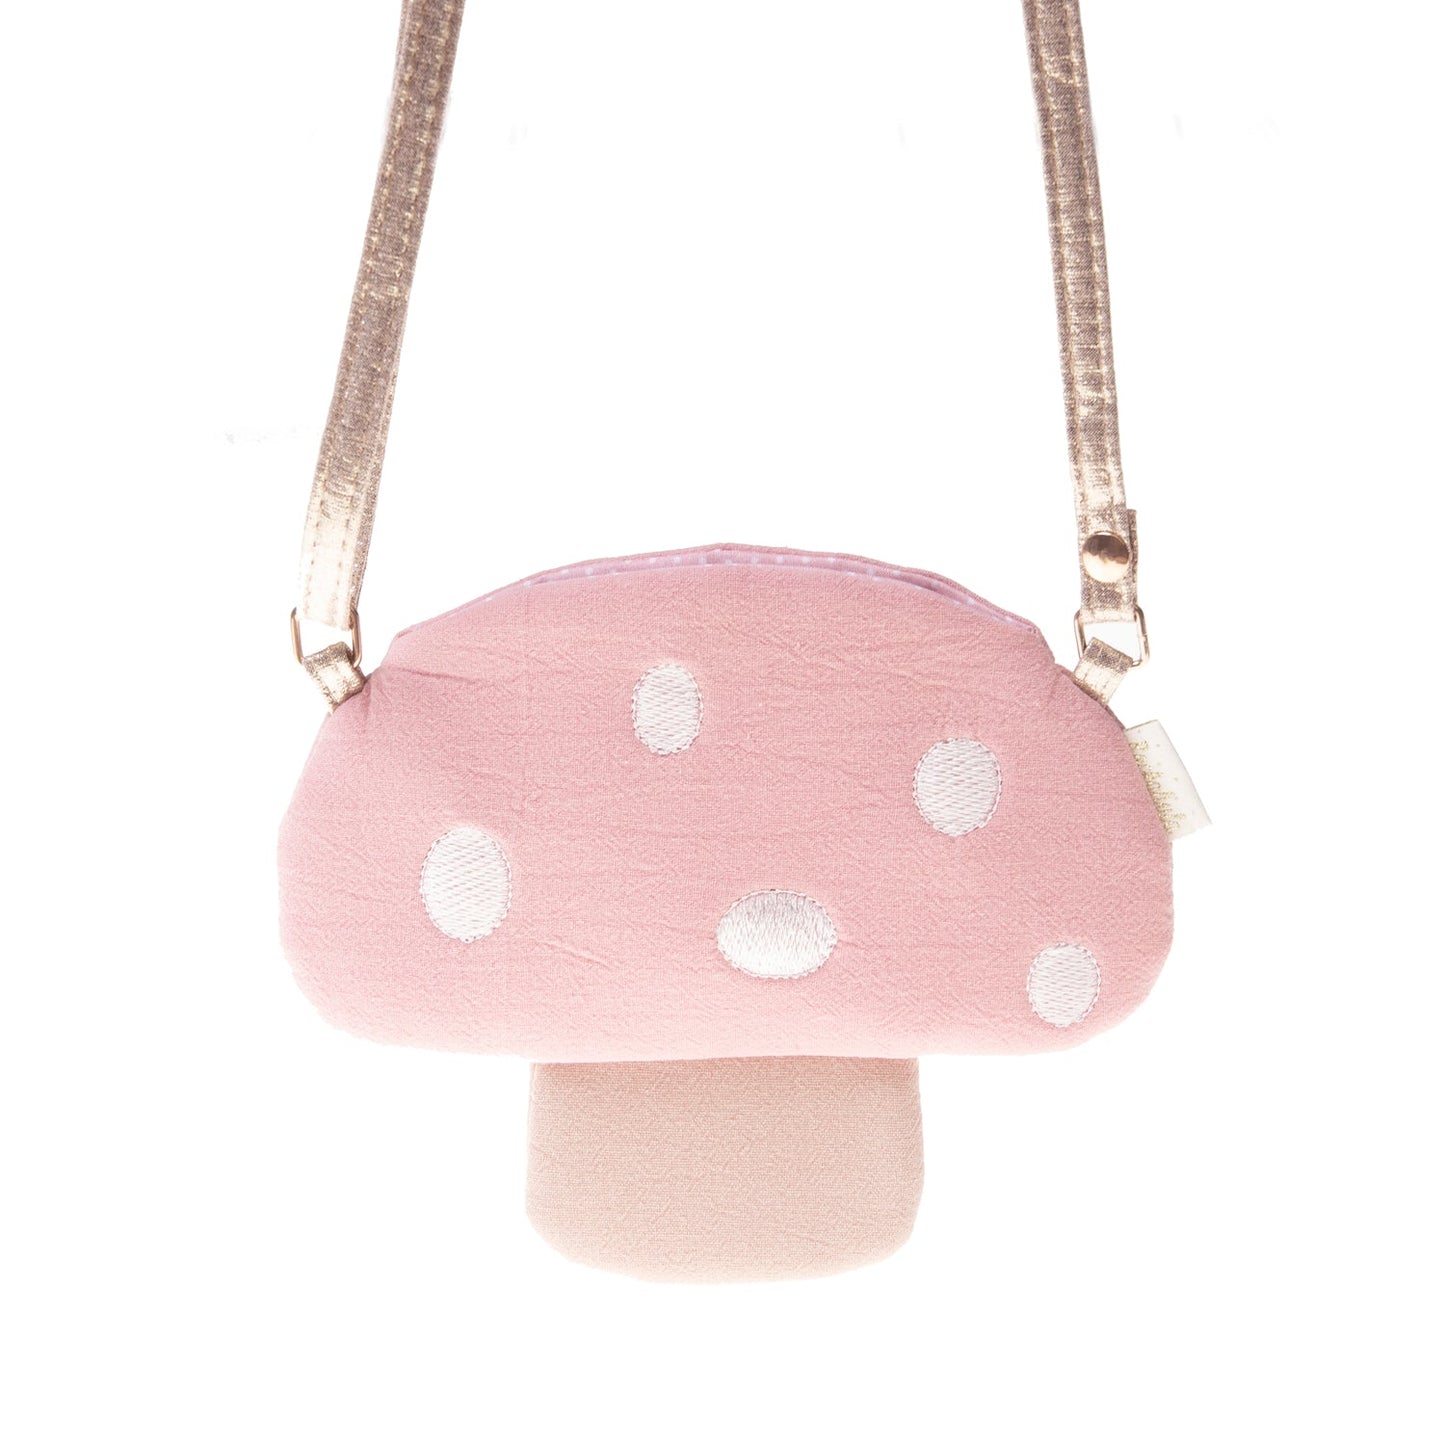 Little Toadstool Bag - Muddy Boots Home UK